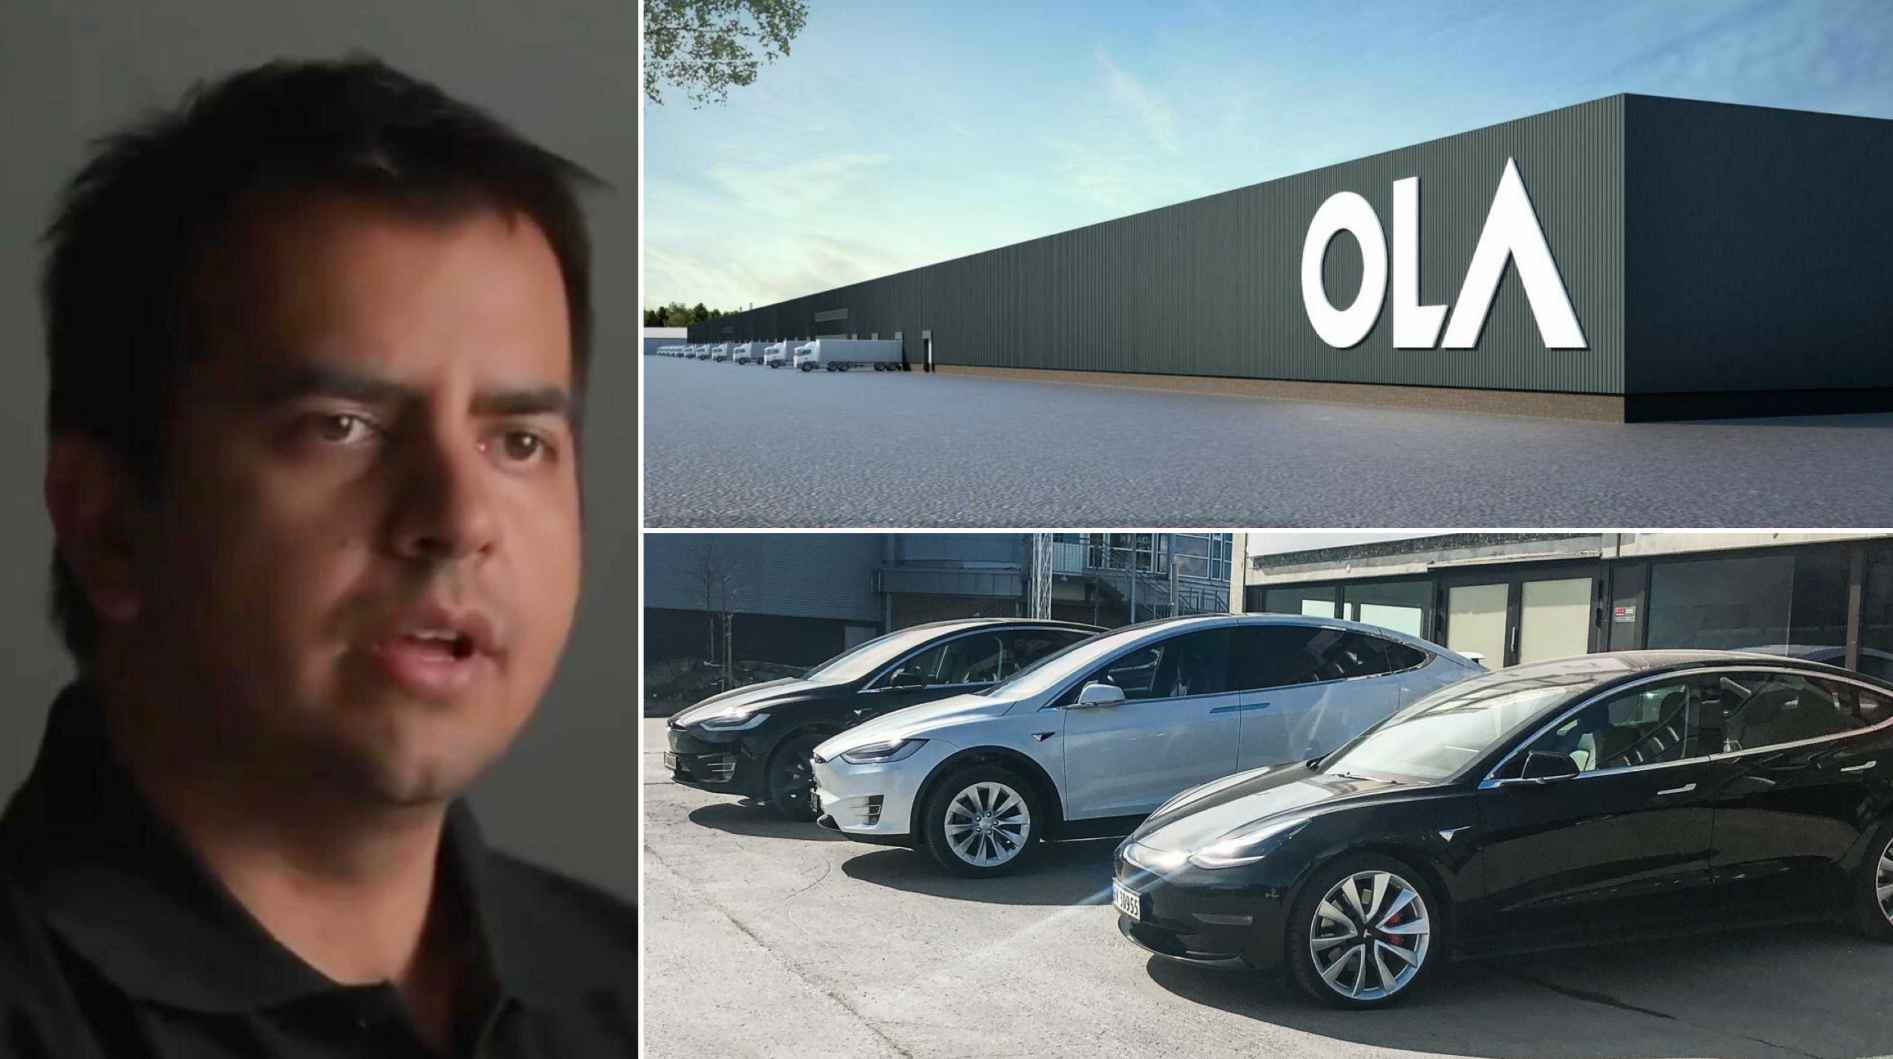 Ola Electric CEO Bhavish Aggarwal has opposed calls for a reduction on import duty for EVs. Image: Ola/Tesla